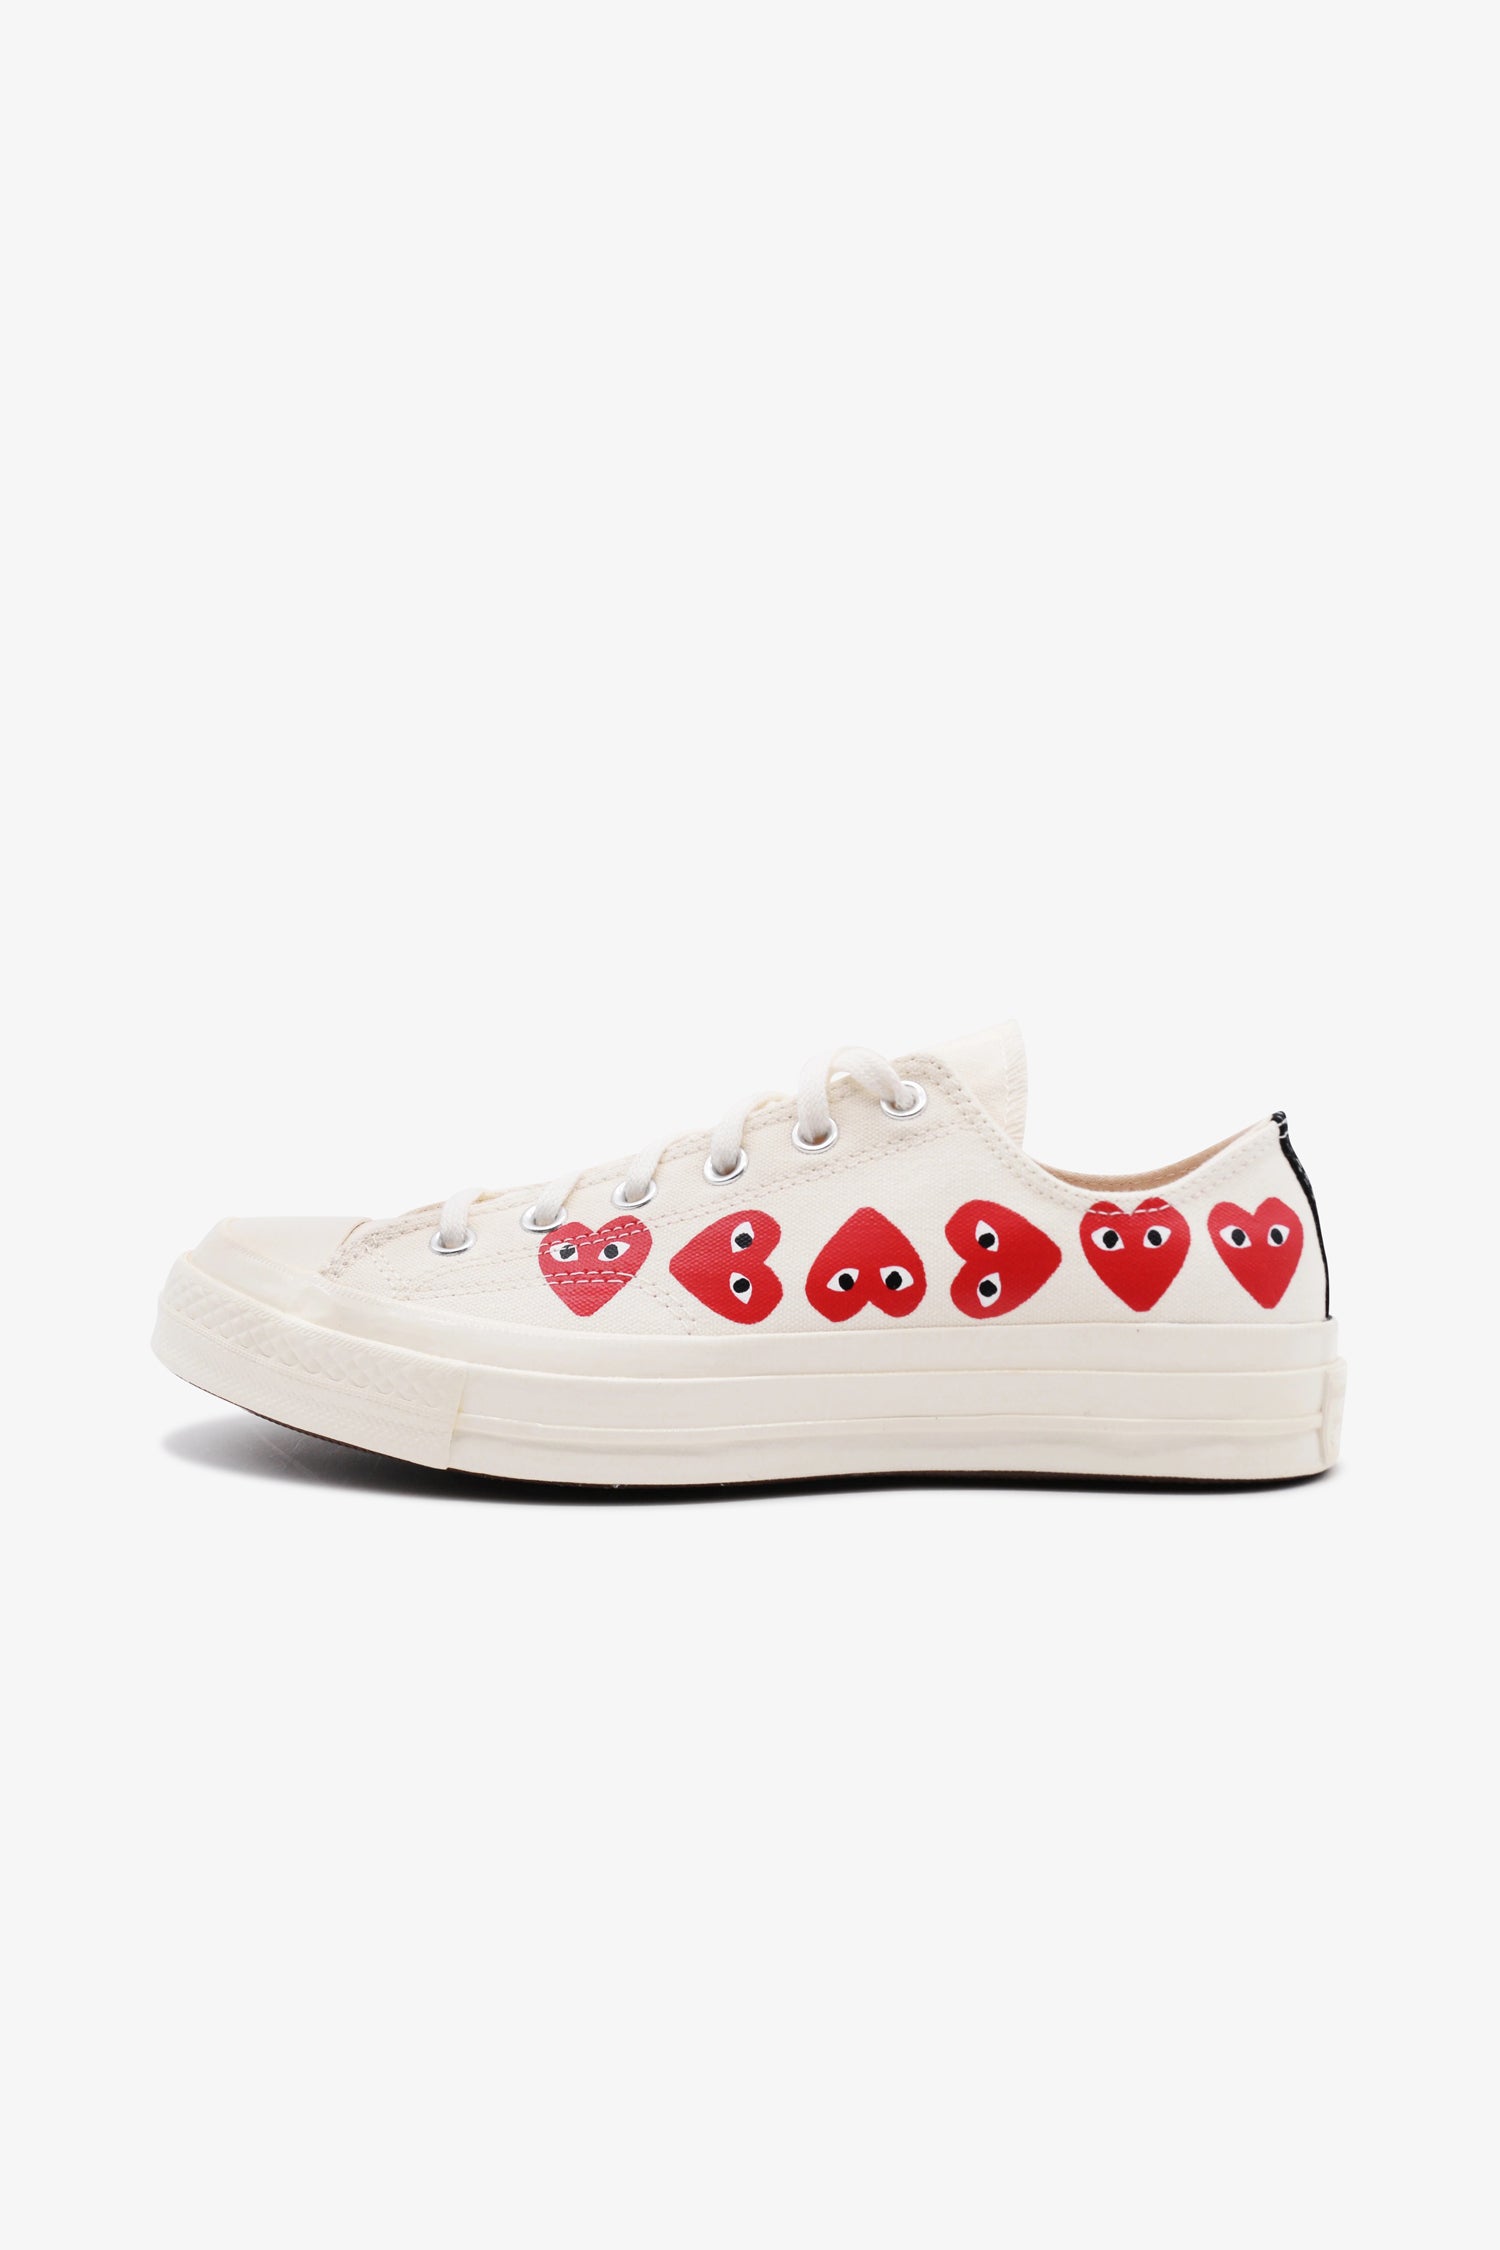 Selectshop FRAME - COMME DES GARCONS PLAY Converse Chuck Taylor All Star '70 Low Multi Red Heart Footwear Dubai